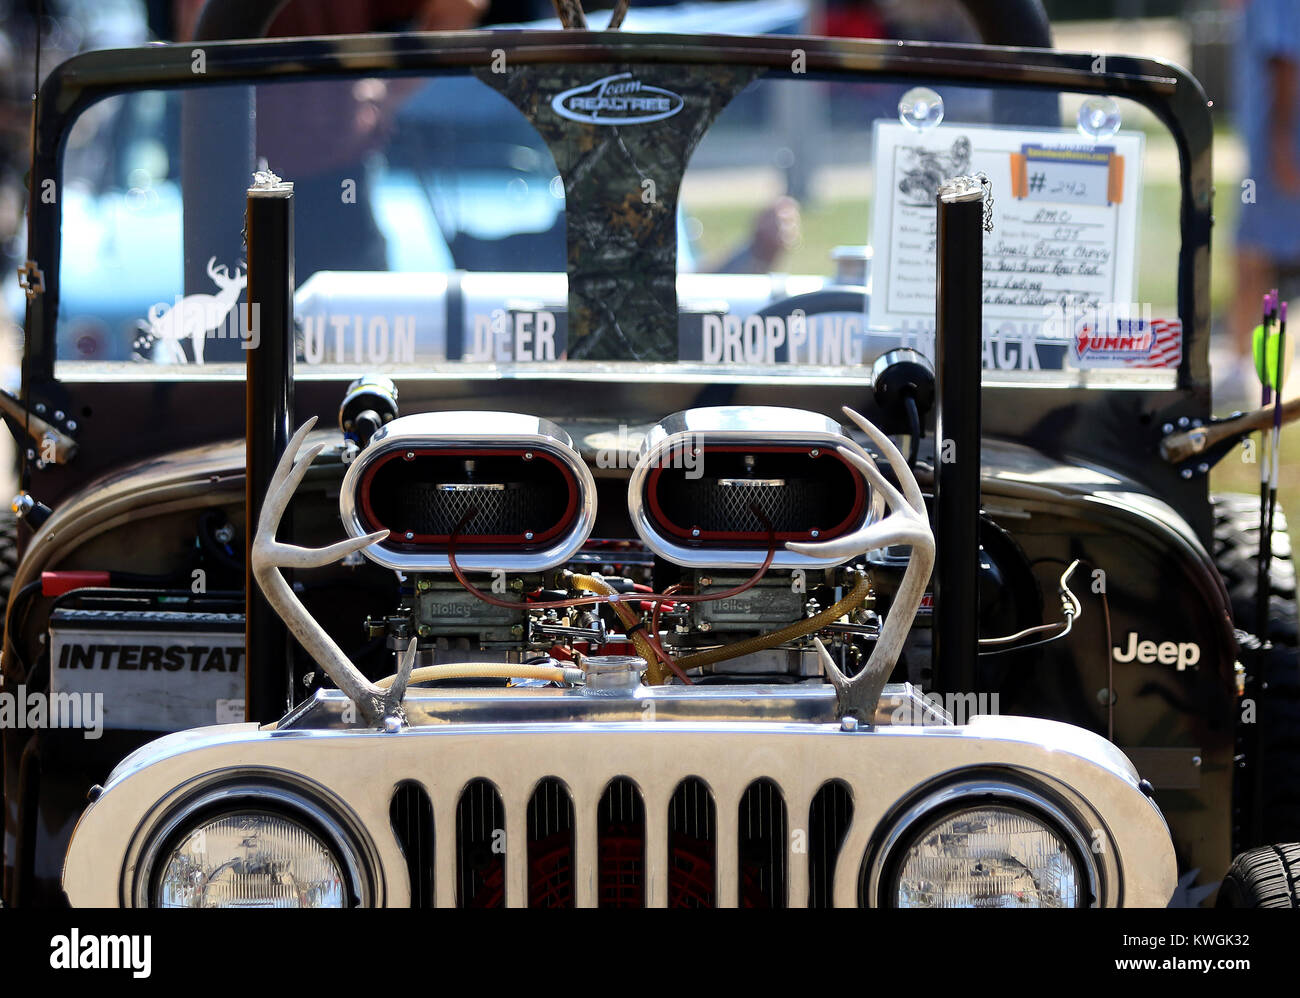 Moline, Iowa, USA. 24th Sep, 2017. This 1975 AMC Jeep CJ5 with a 350 Vortec small block Chevy engine is a one of a kind custom Rat Rod owned by Lexi Loding and was on display, Sunday, September 24, 2017, during the annual Quad-City's Vintage Rods car show held at Black Hawk College in Moline. More than 400 antique cars, hot rods, street rods and special-interest cars were on hand at the show. Credit: John Schultz/Quad-City Times/ZUMA Wire/Alamy Live News Stock Photo